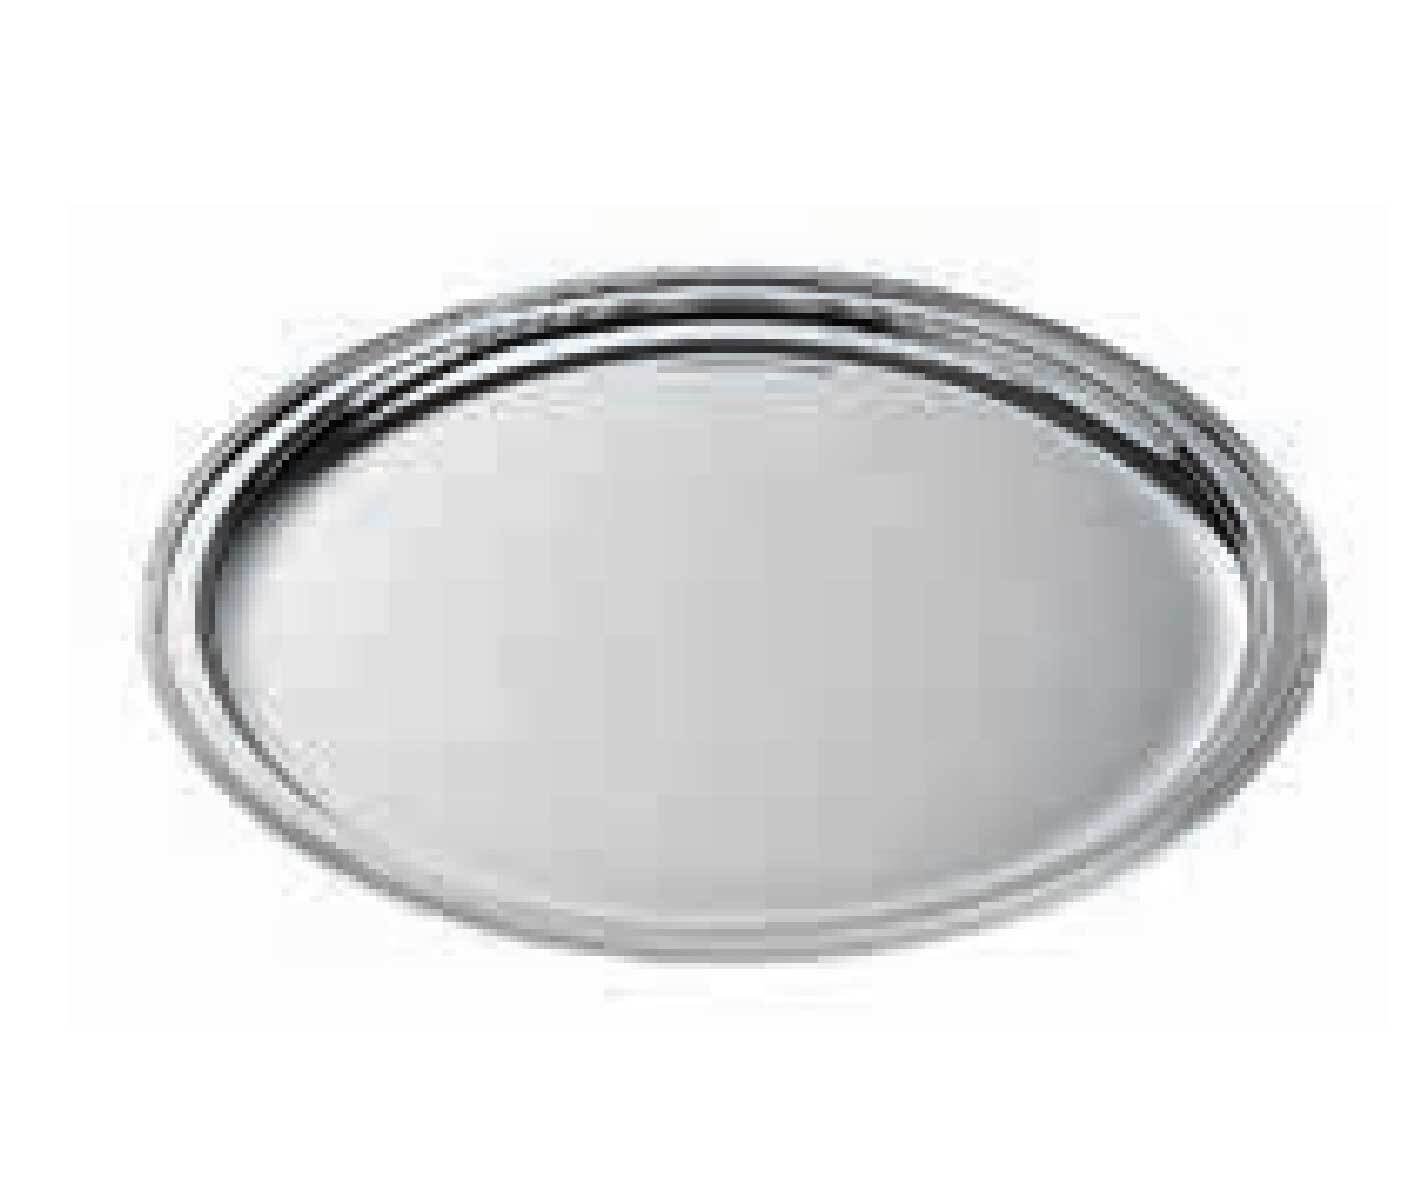 Ercuis Rencontre Round Tray 14.125 Inch Silver Plated F522460-36